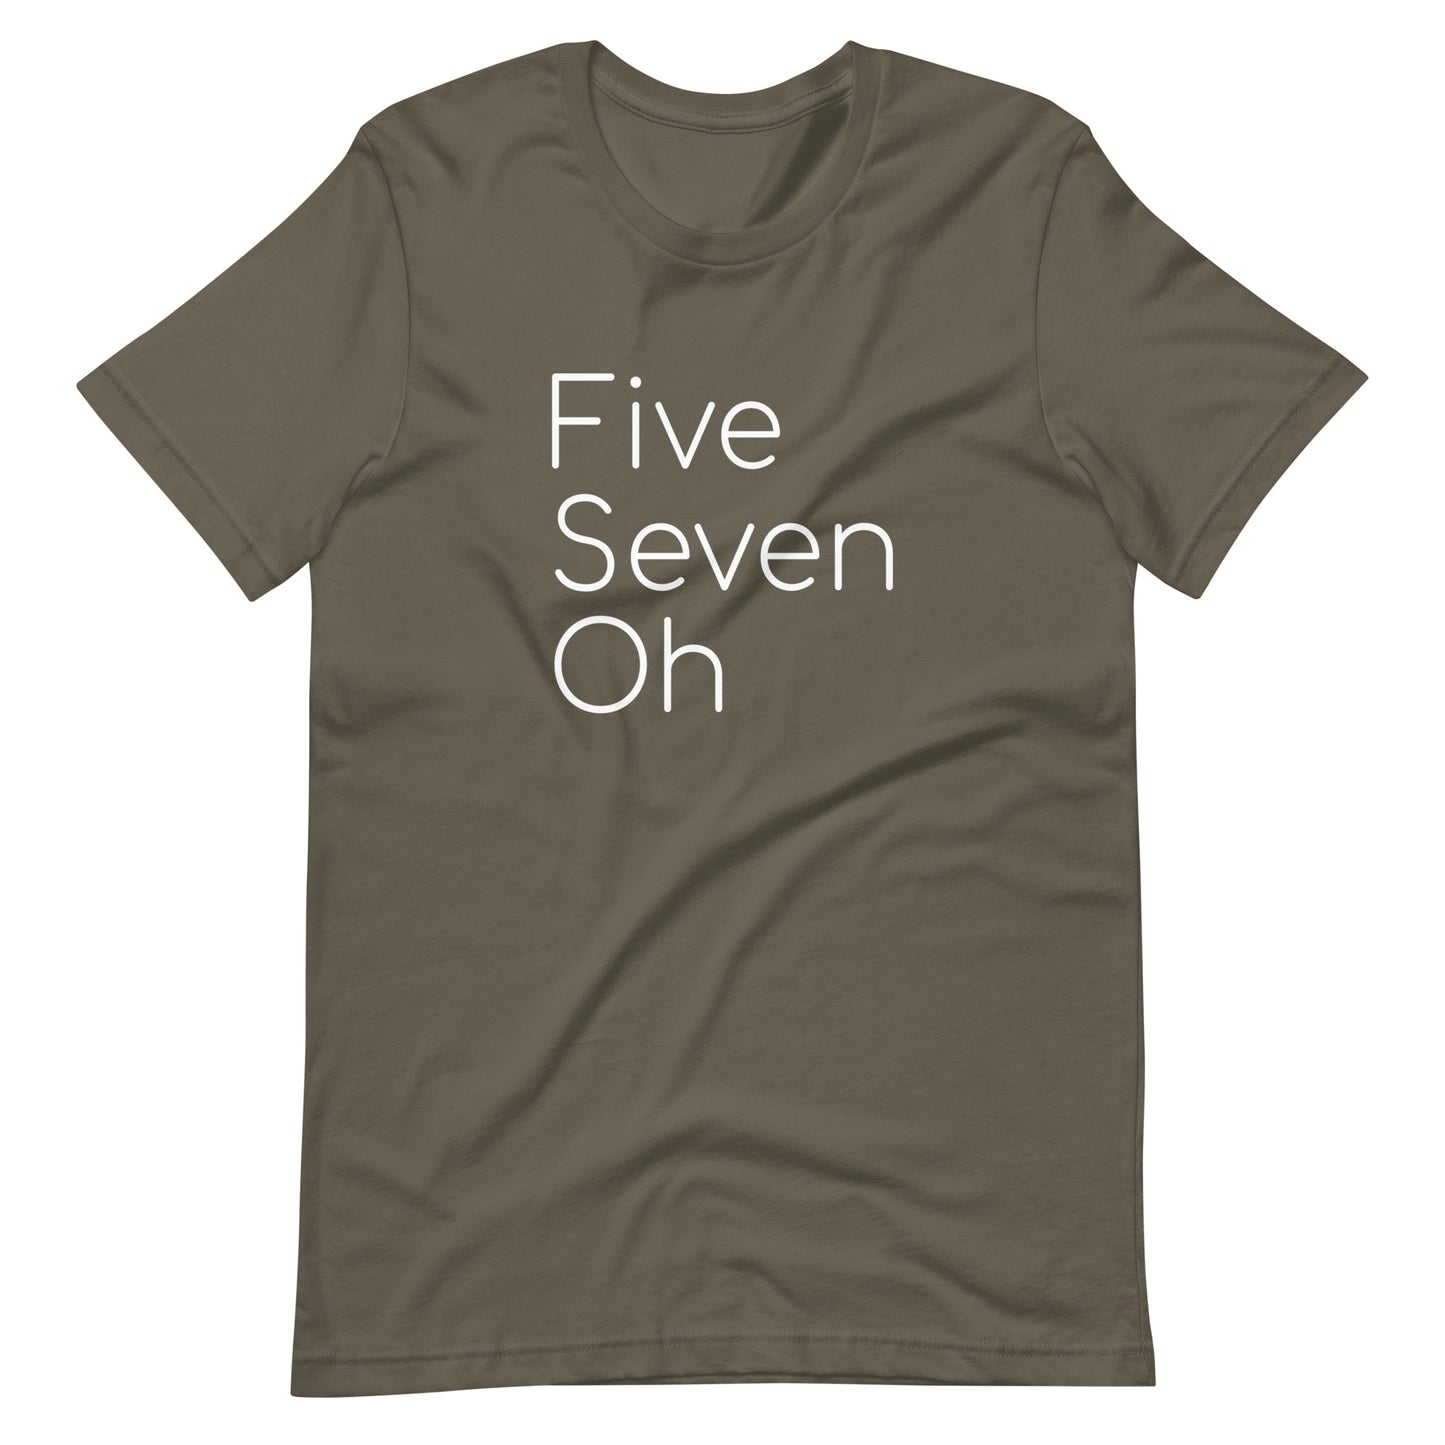 Five Seven Oh Tee